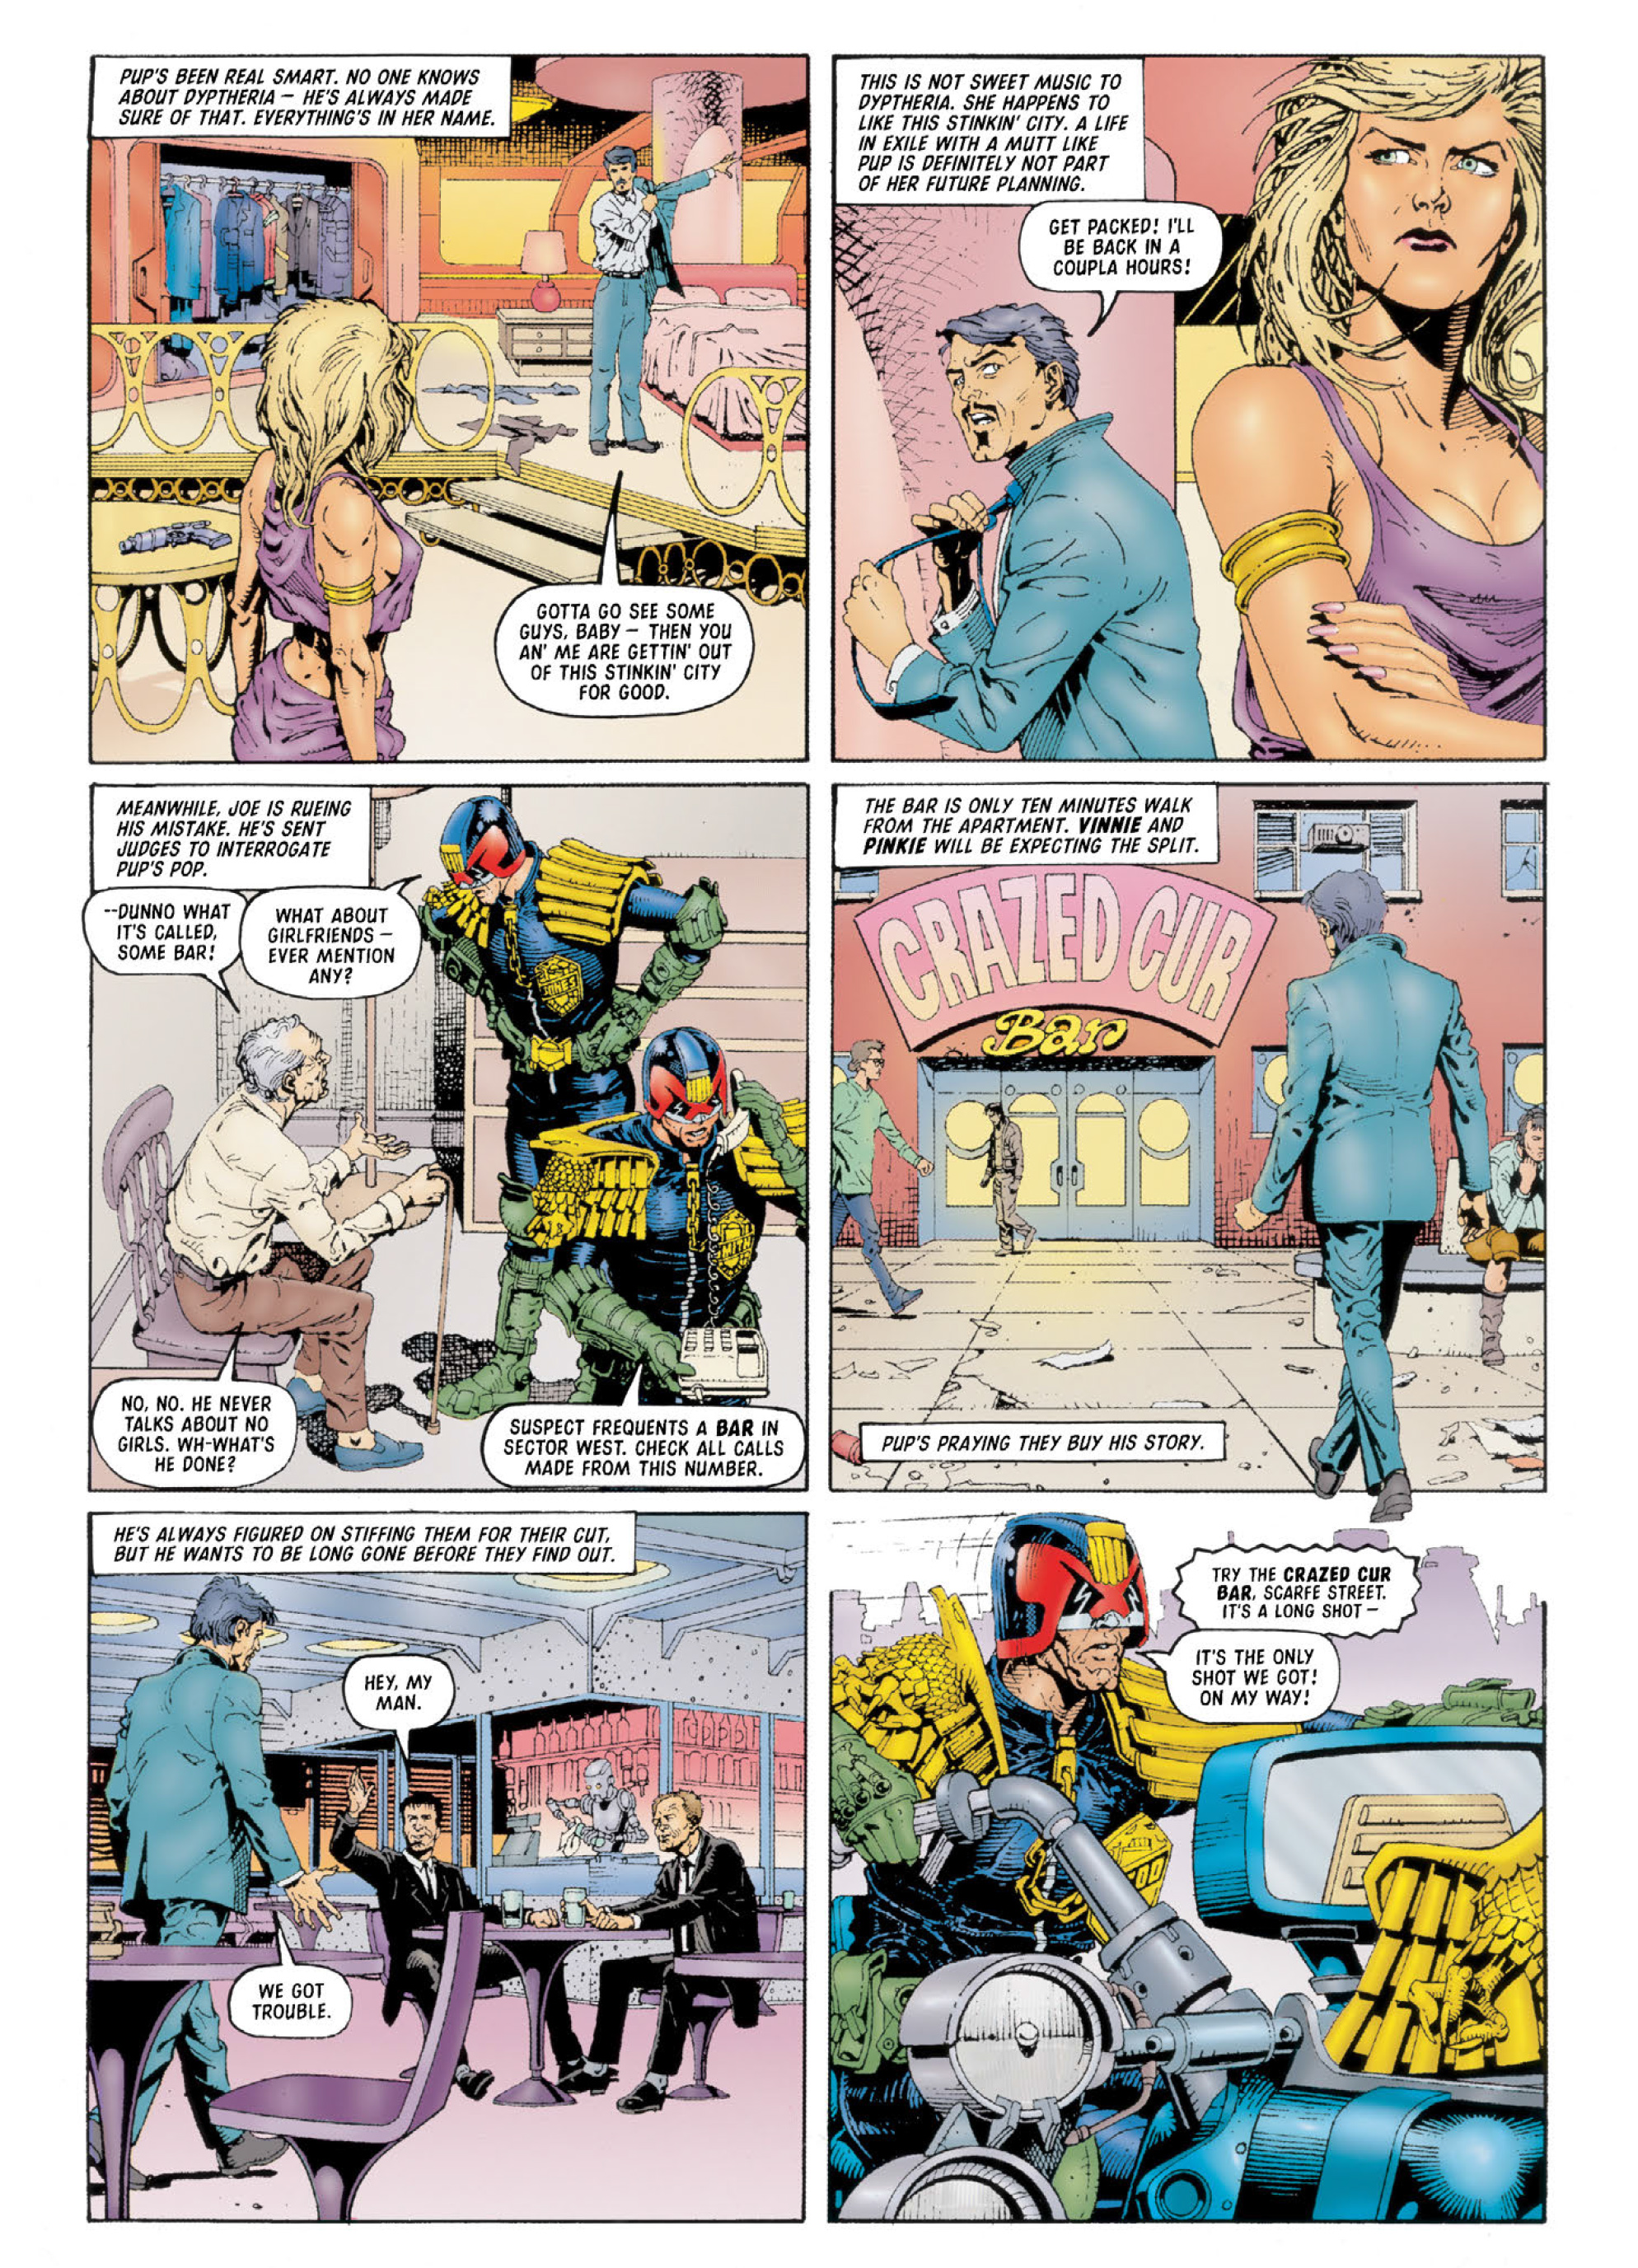 Read online Judge Dredd: The Complete Case Files comic -  Issue # TPB 28 - 26